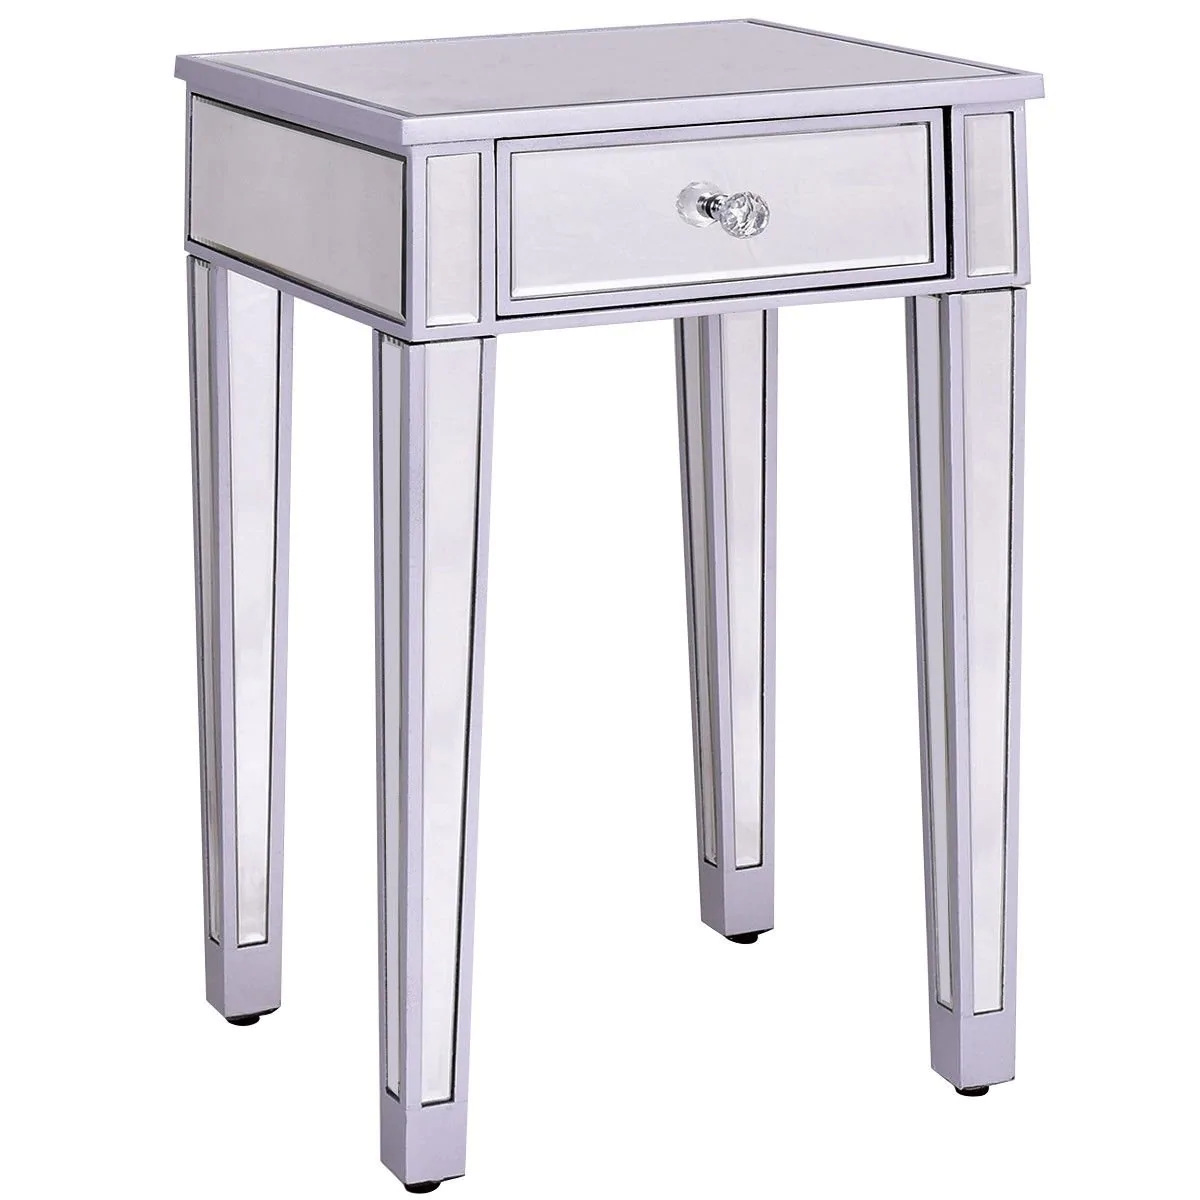 way mirrored accent table nightstand end bedside storage cabinet drawer with sliver free shipping today room essentials rest pillow rattan and chairs west elm coupon code tall